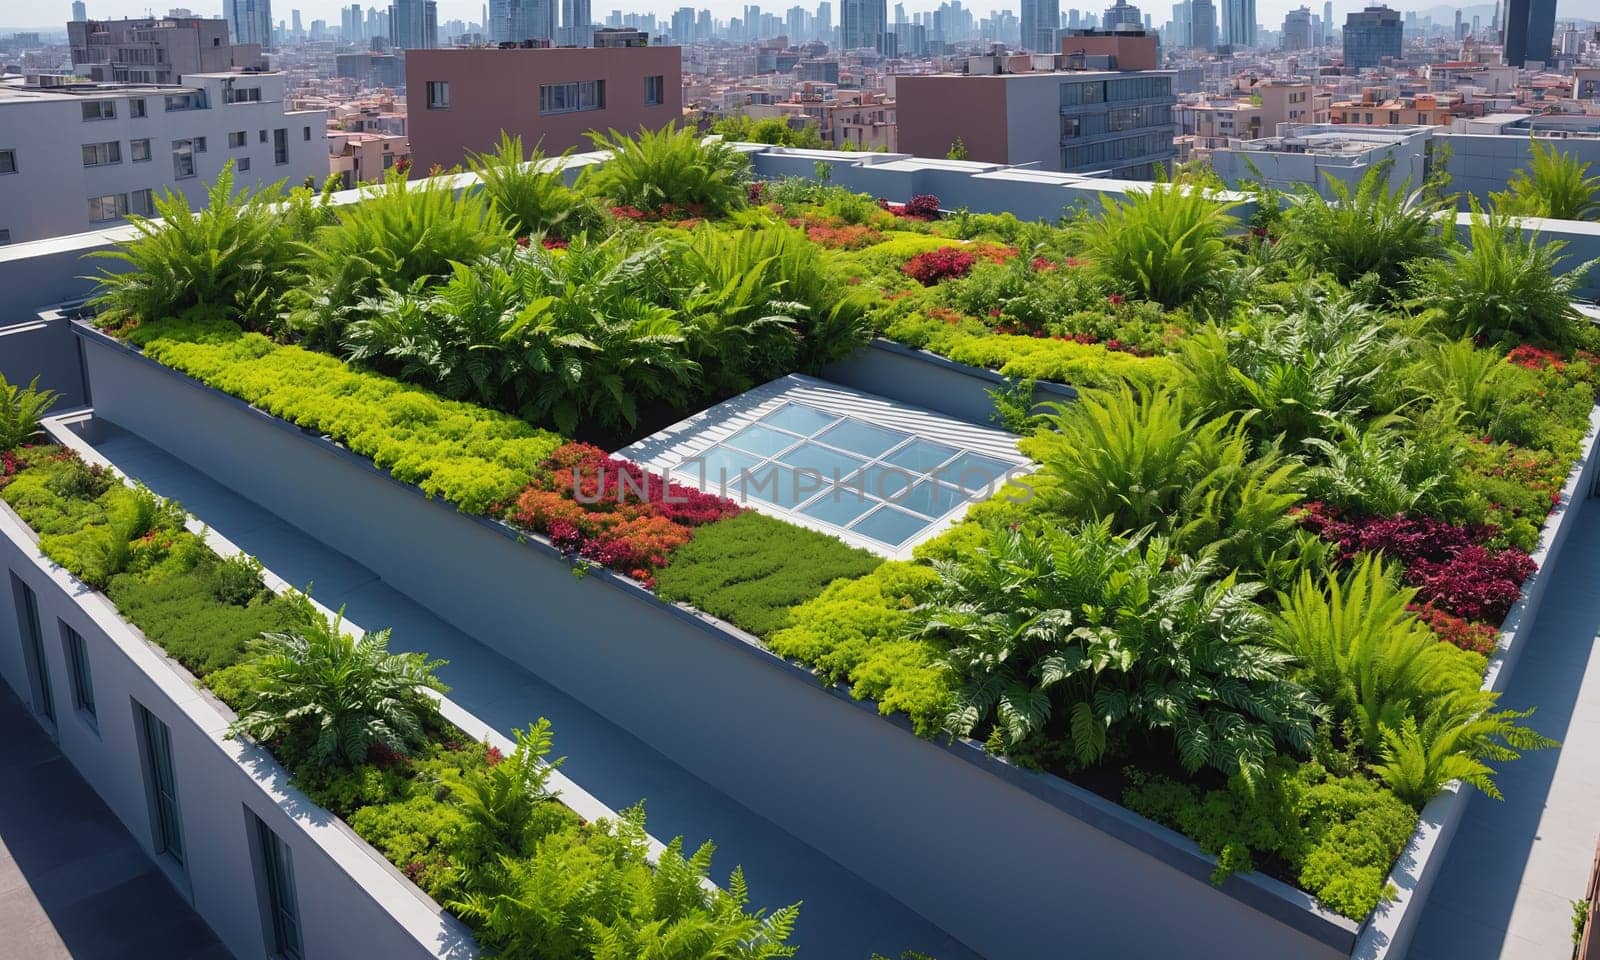 Urban Green Roof Amidst City Skyline by Andre1ns